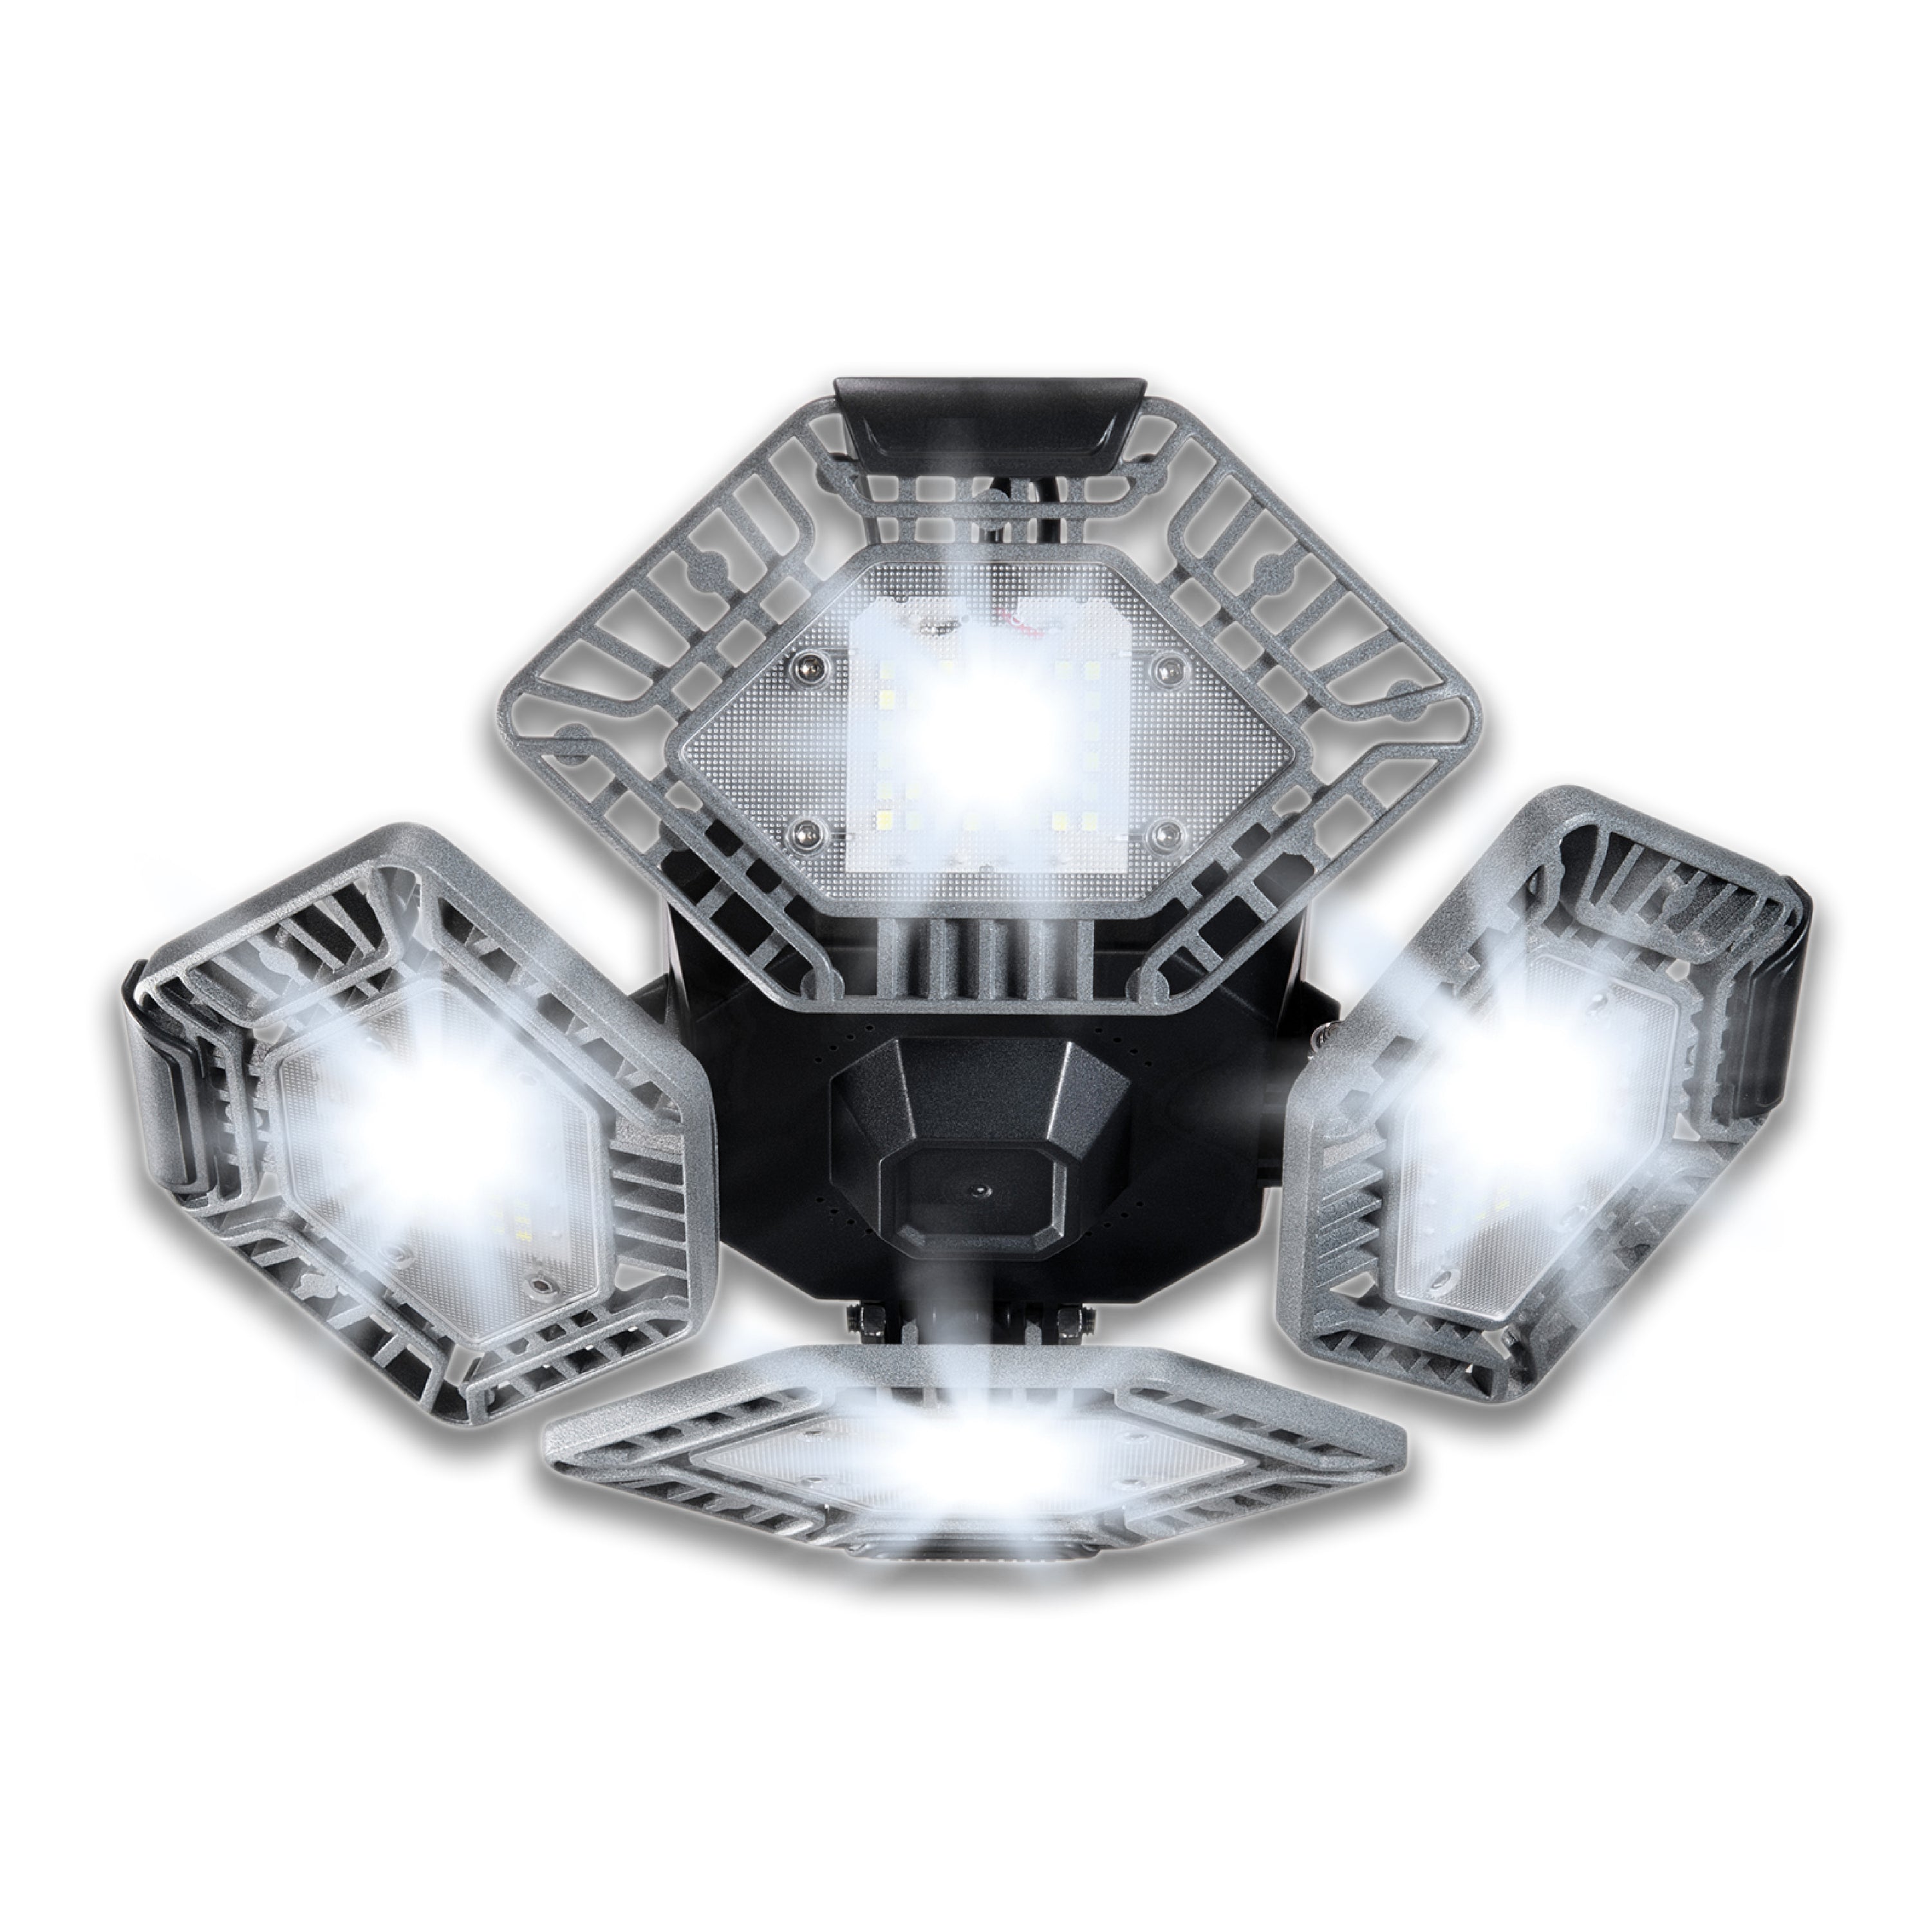 Bell+Howell Quadburst LED Lighting with 5,500 Lumens, 4 Multi-Directional Panels with 192 Ultra High-Intensity LED Bulbs, Simple Installation and Wireless